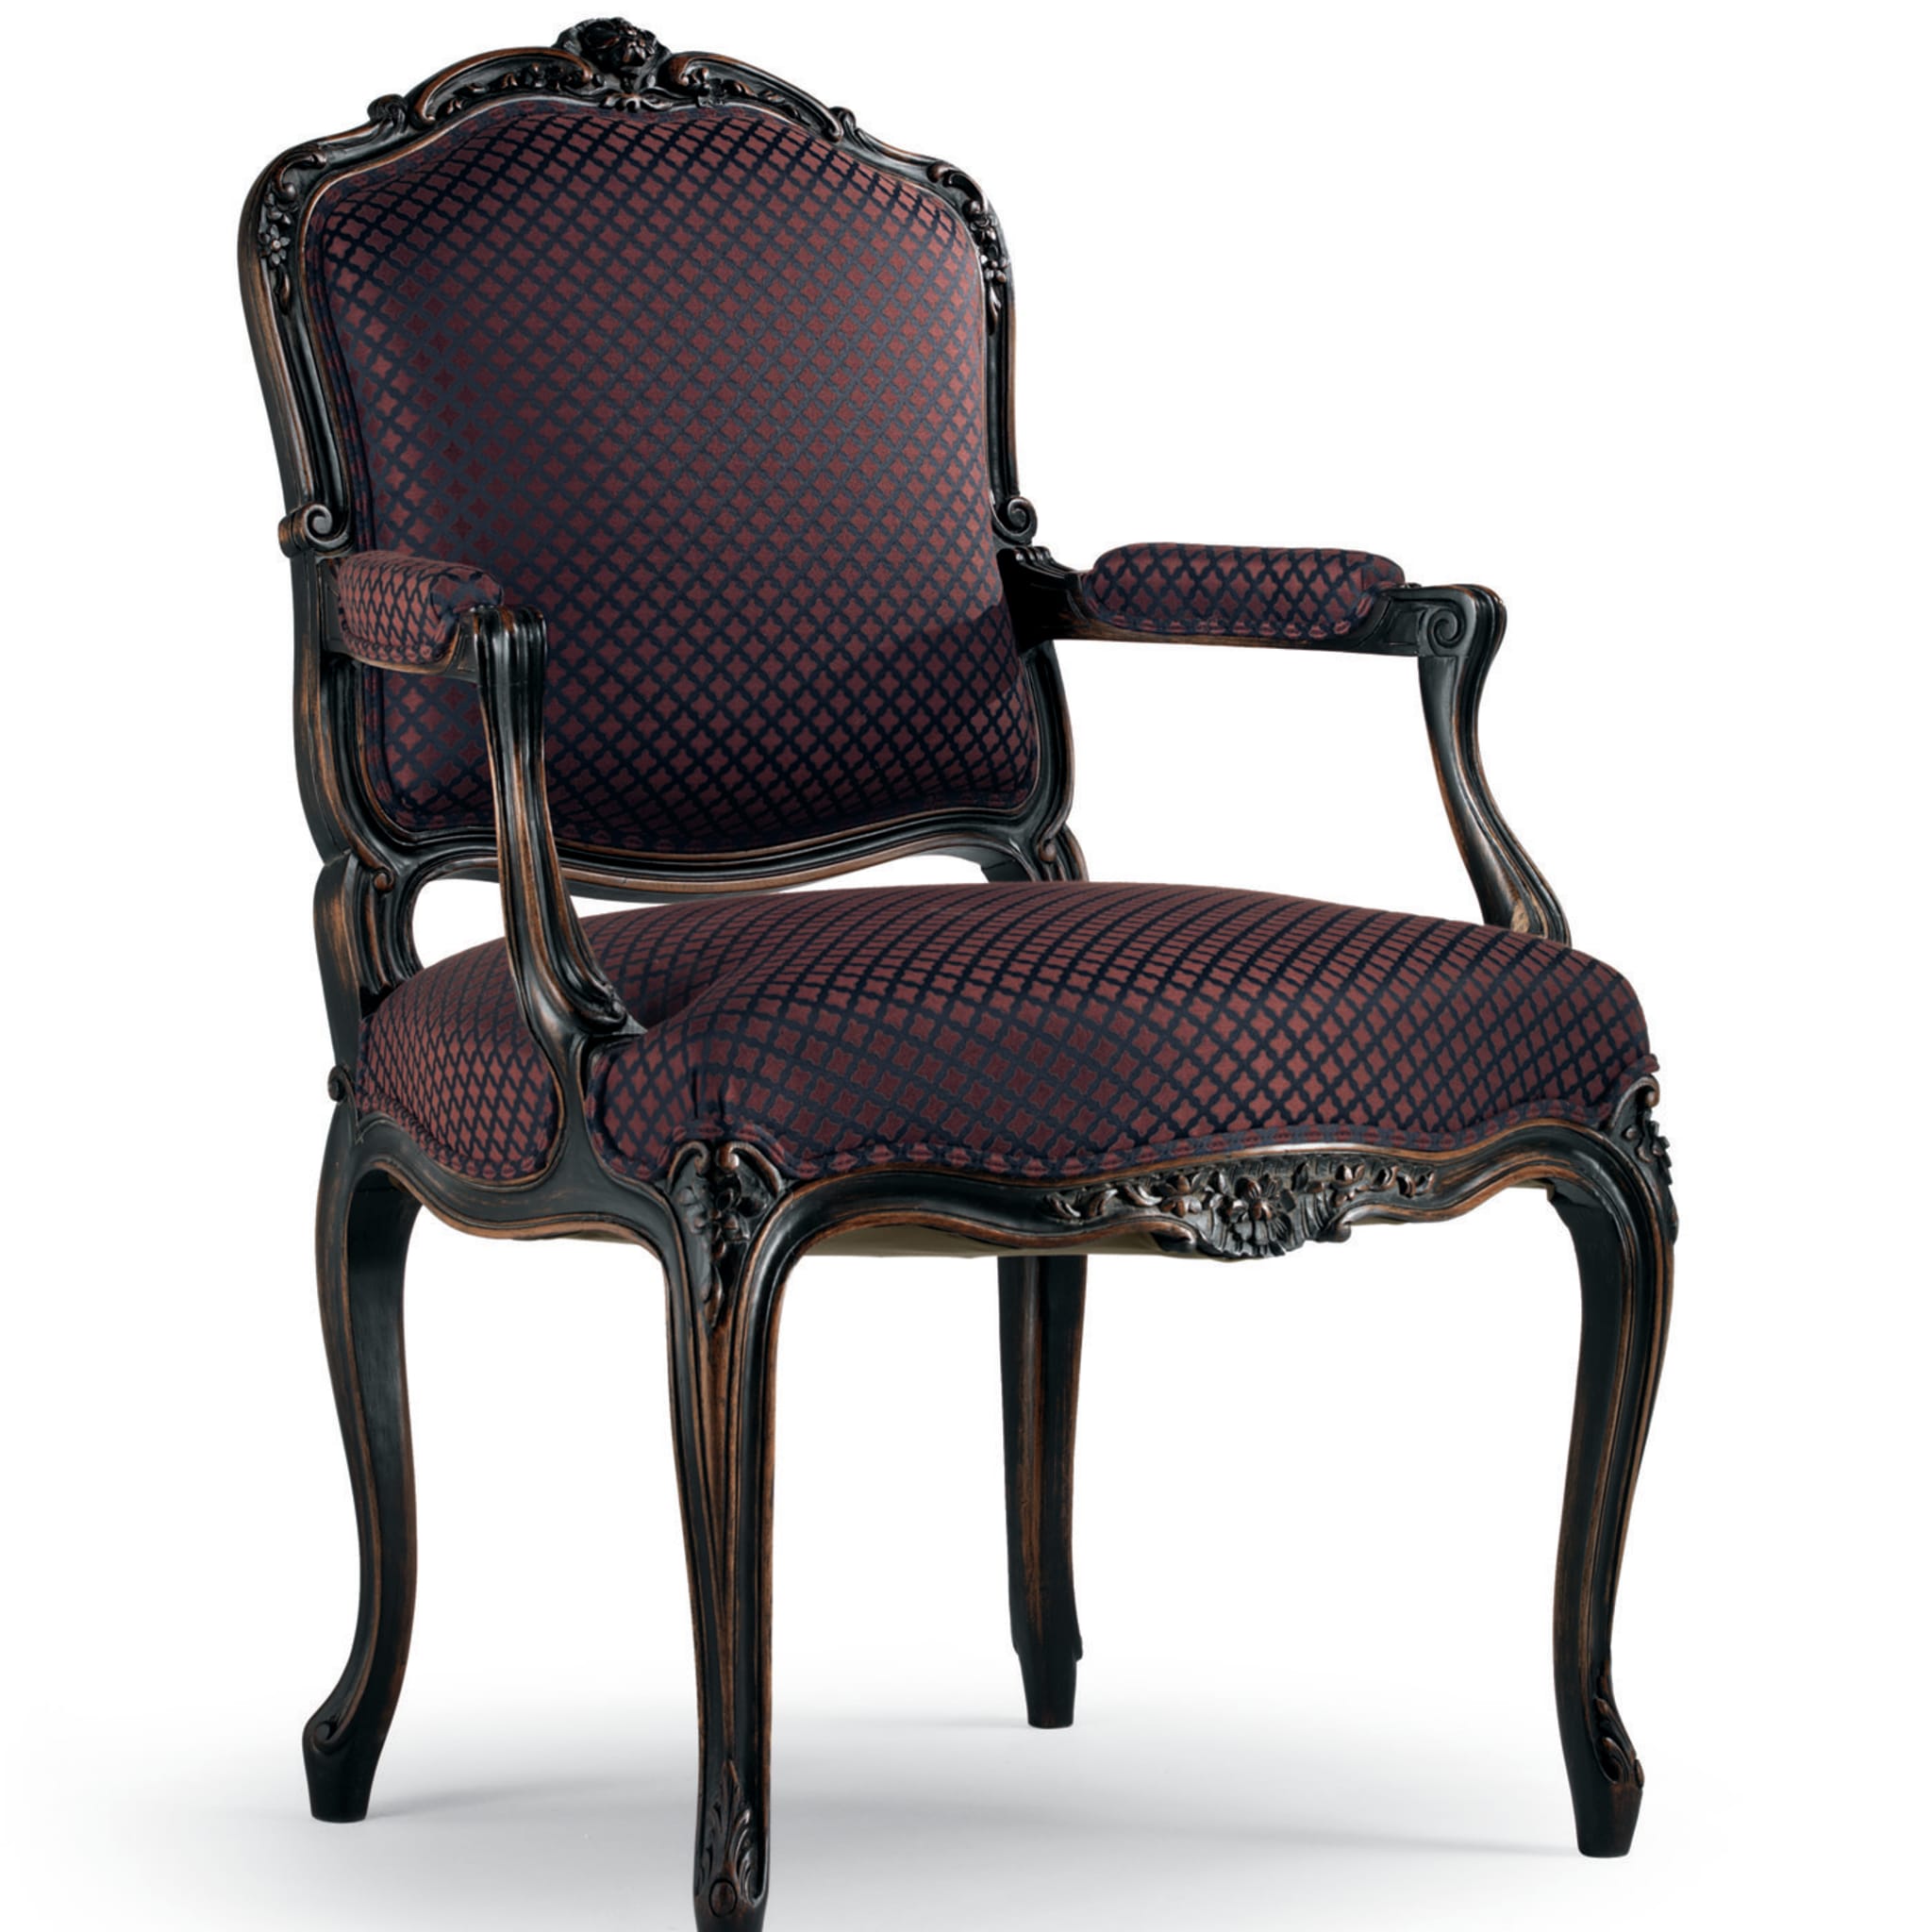 Carved Chair With Armrests Louis XV #1 - Alternative view 1